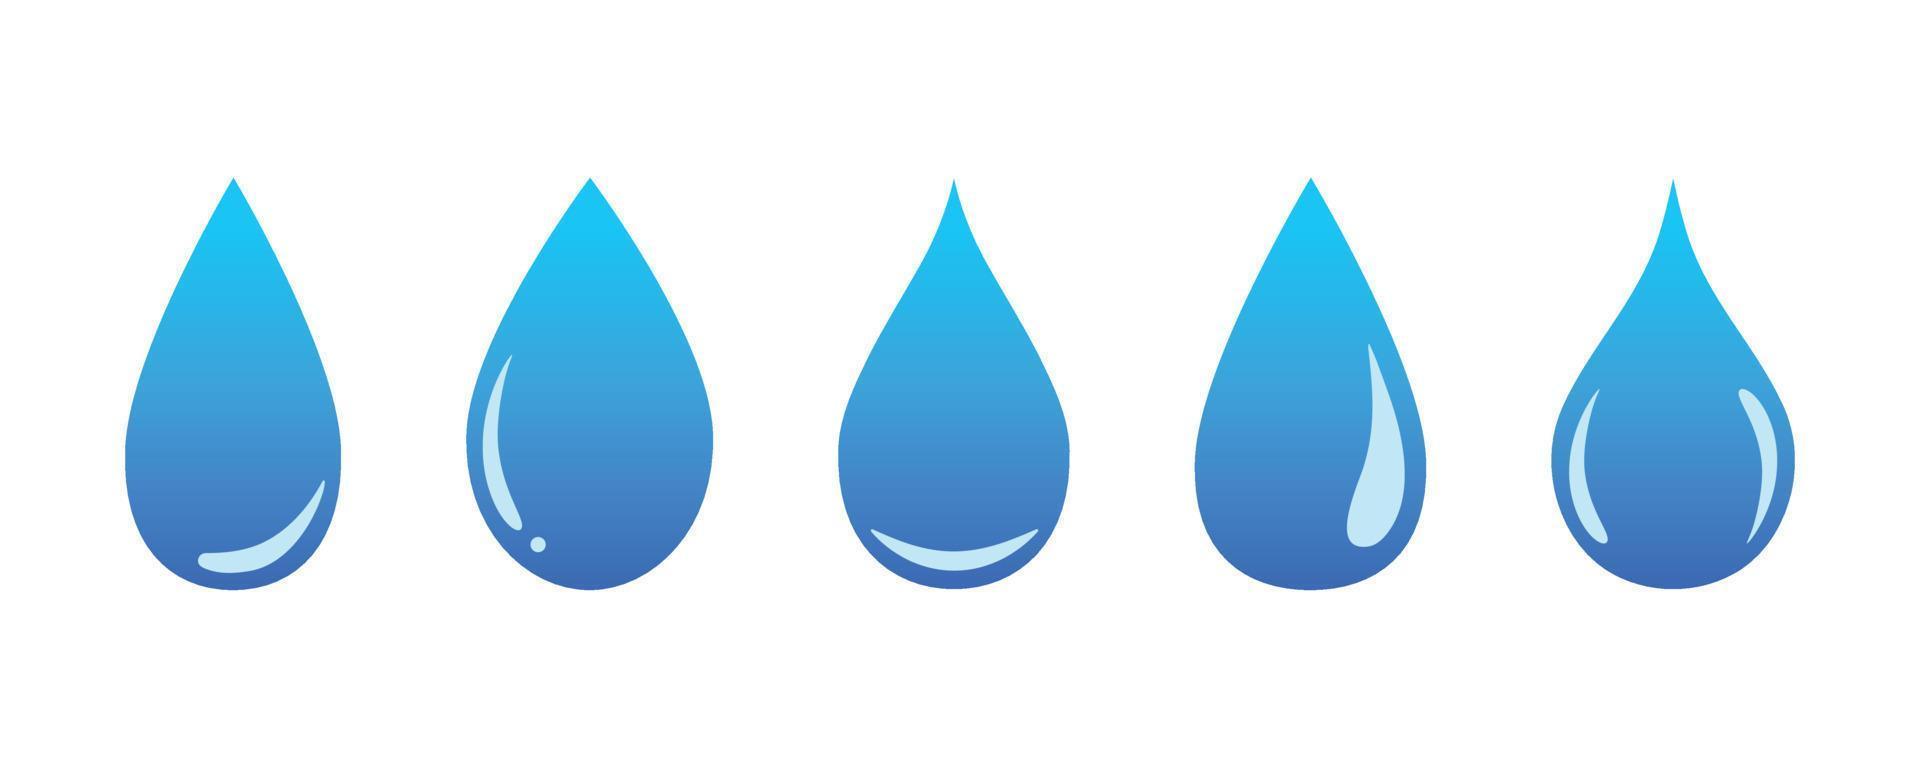 Set of gradient water drops in different shapes and highlights. Flat vector illustration